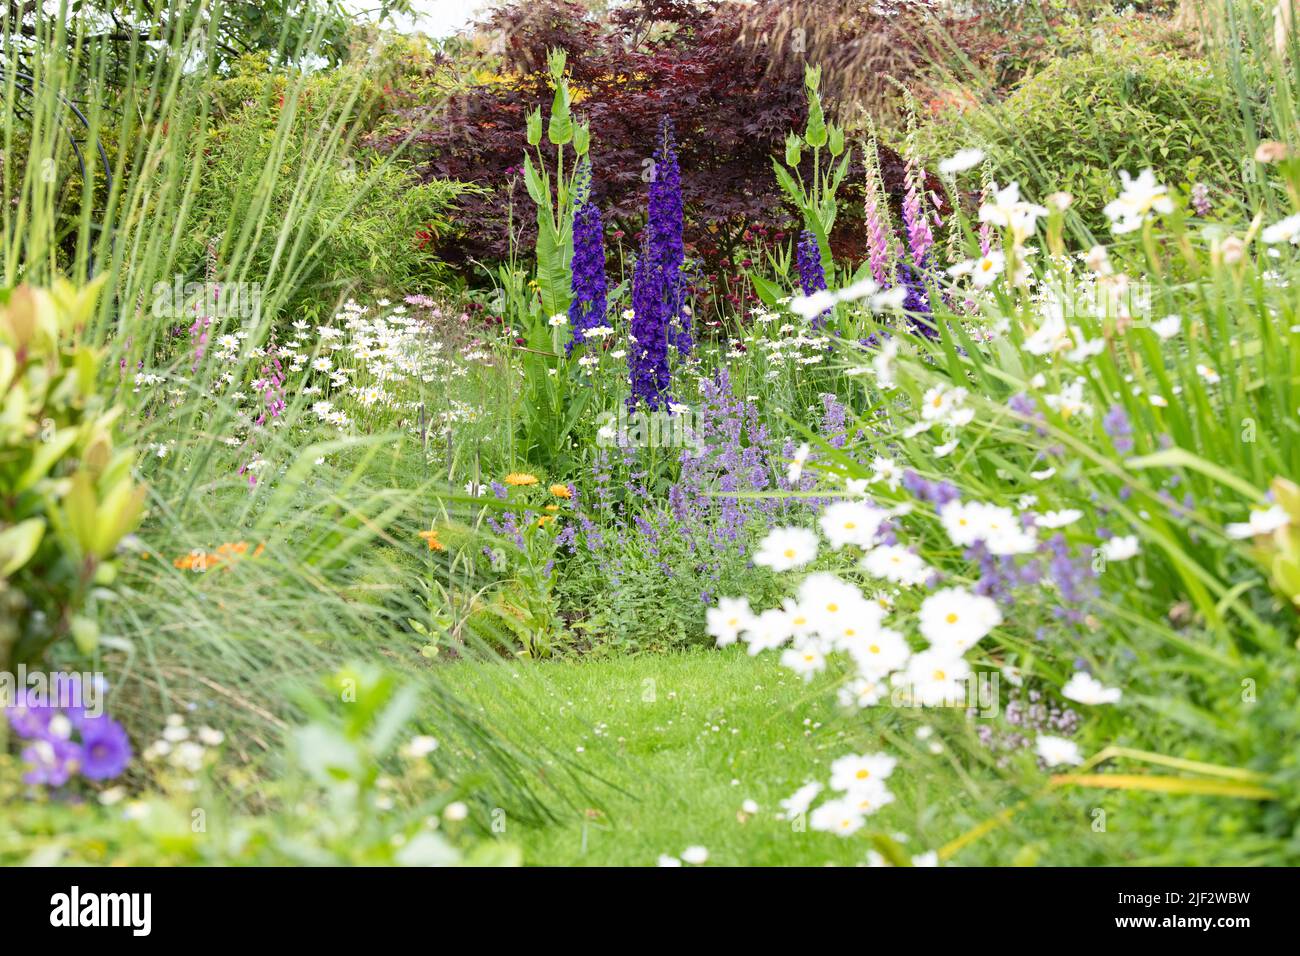 Garden rewilding - planting wildflowers such as teasles, foxgloves and ox-eye daisies alongside insect attracting perennials (catmint and delphiniums) Stock Photo